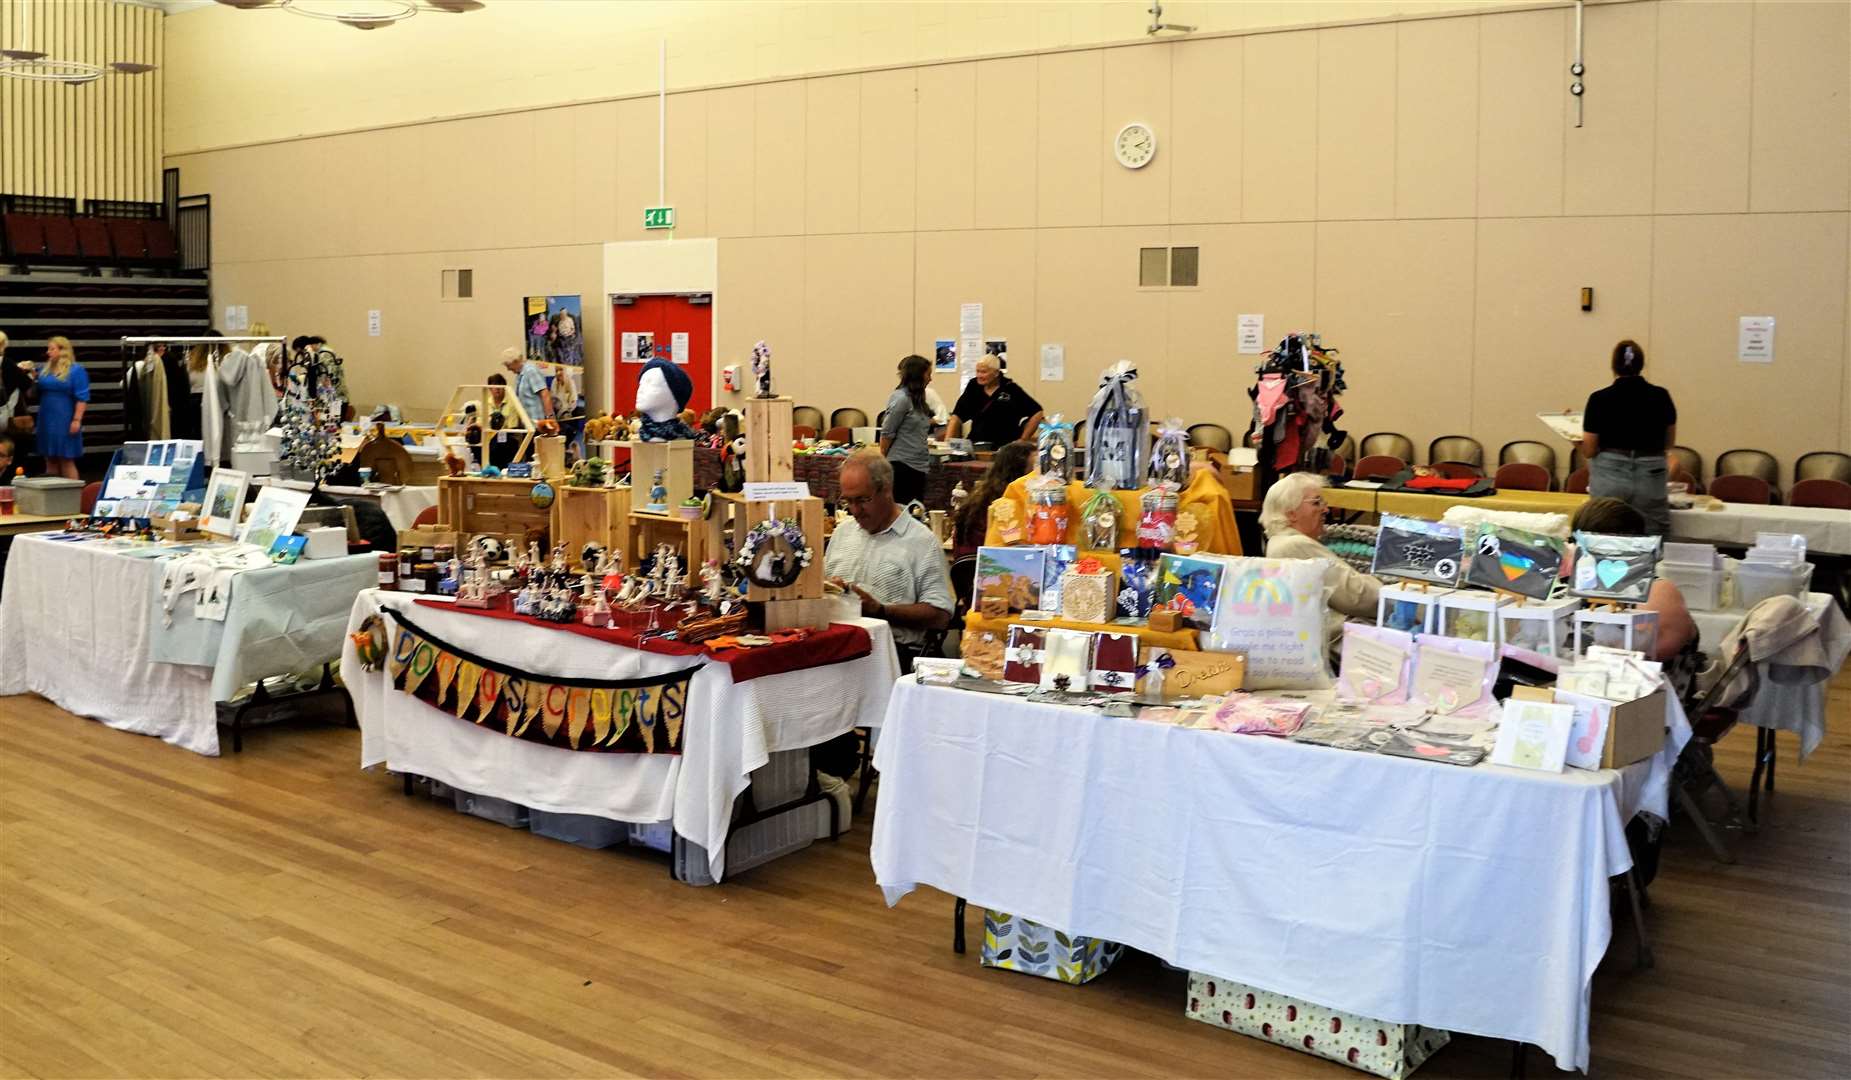 Craft stalls at the Assembly Rooms in Wick last year. Trading Standards said that it will not descend on these events with the heavy-handed tactics outlined in a social media post. Picture: DGS